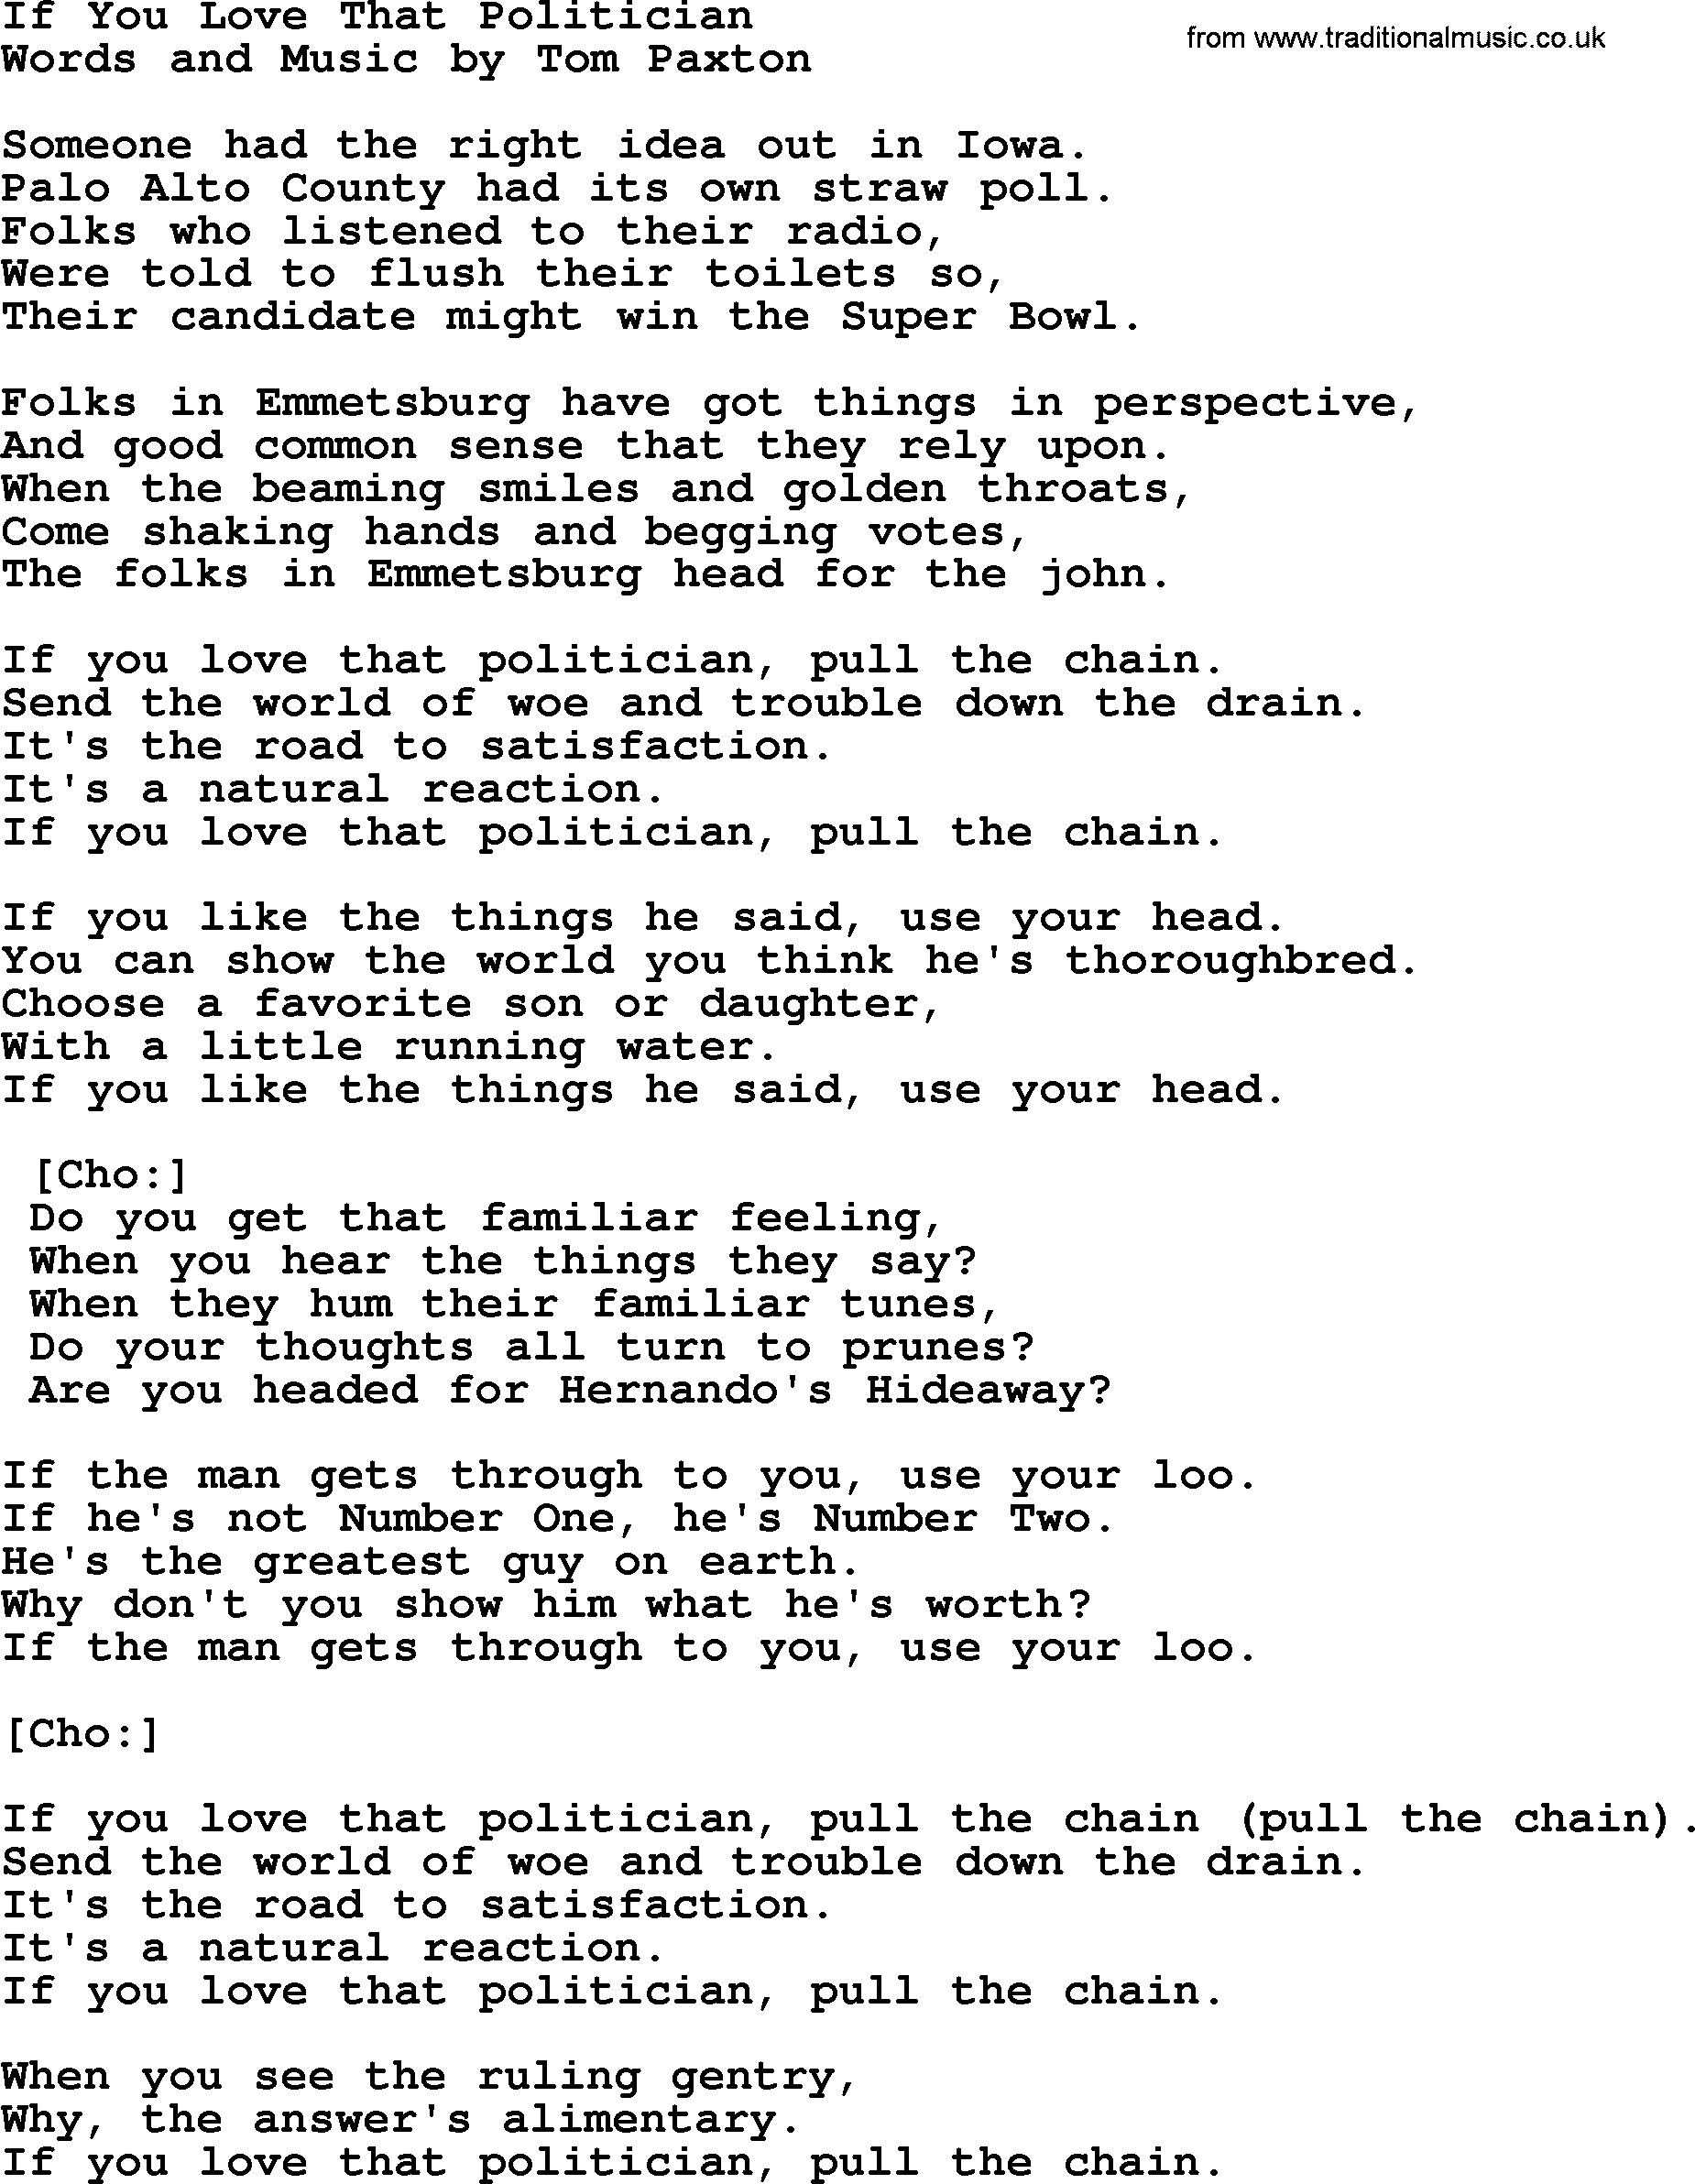 Tom Paxton song: If You Love That Politician, lyrics